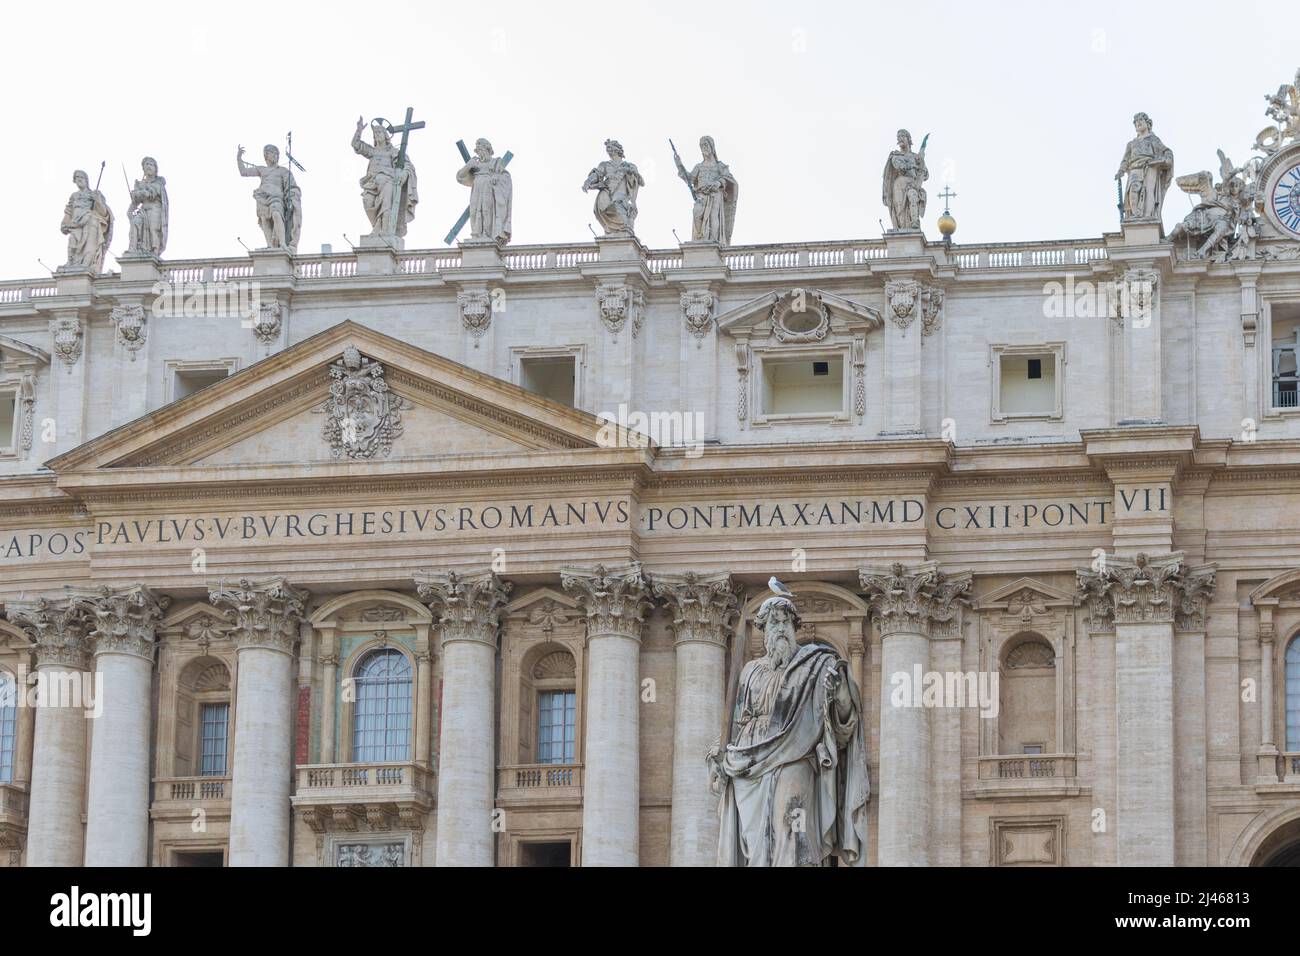 The St. Peter's Basilica, Vatican, Italy Stock Photo